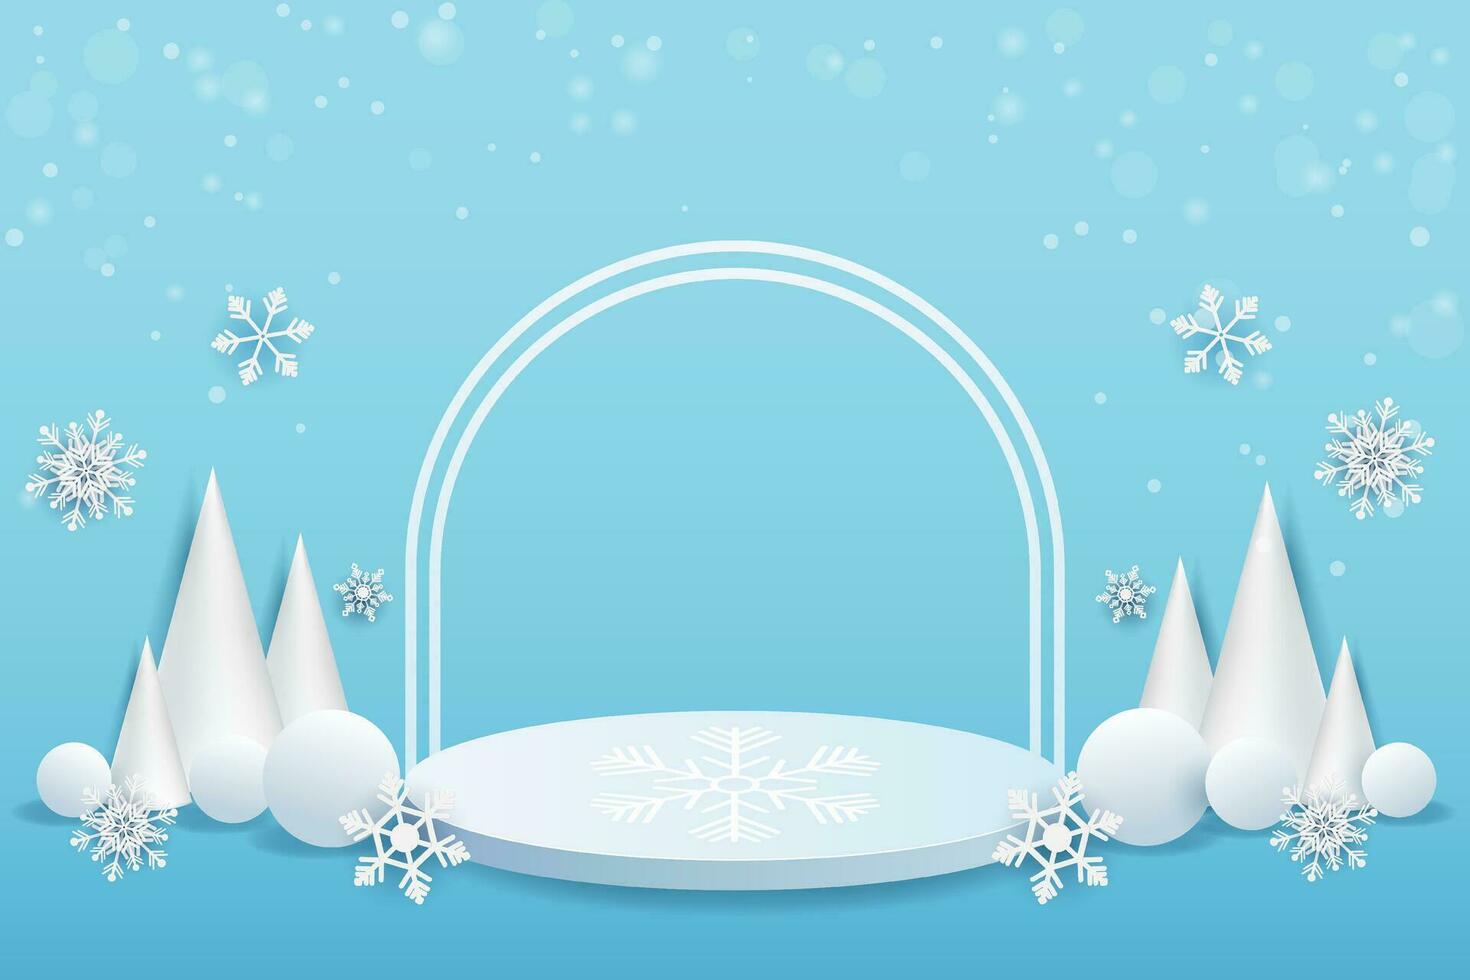 podium to showcase products. empty podium with minimalist design and winter background vector